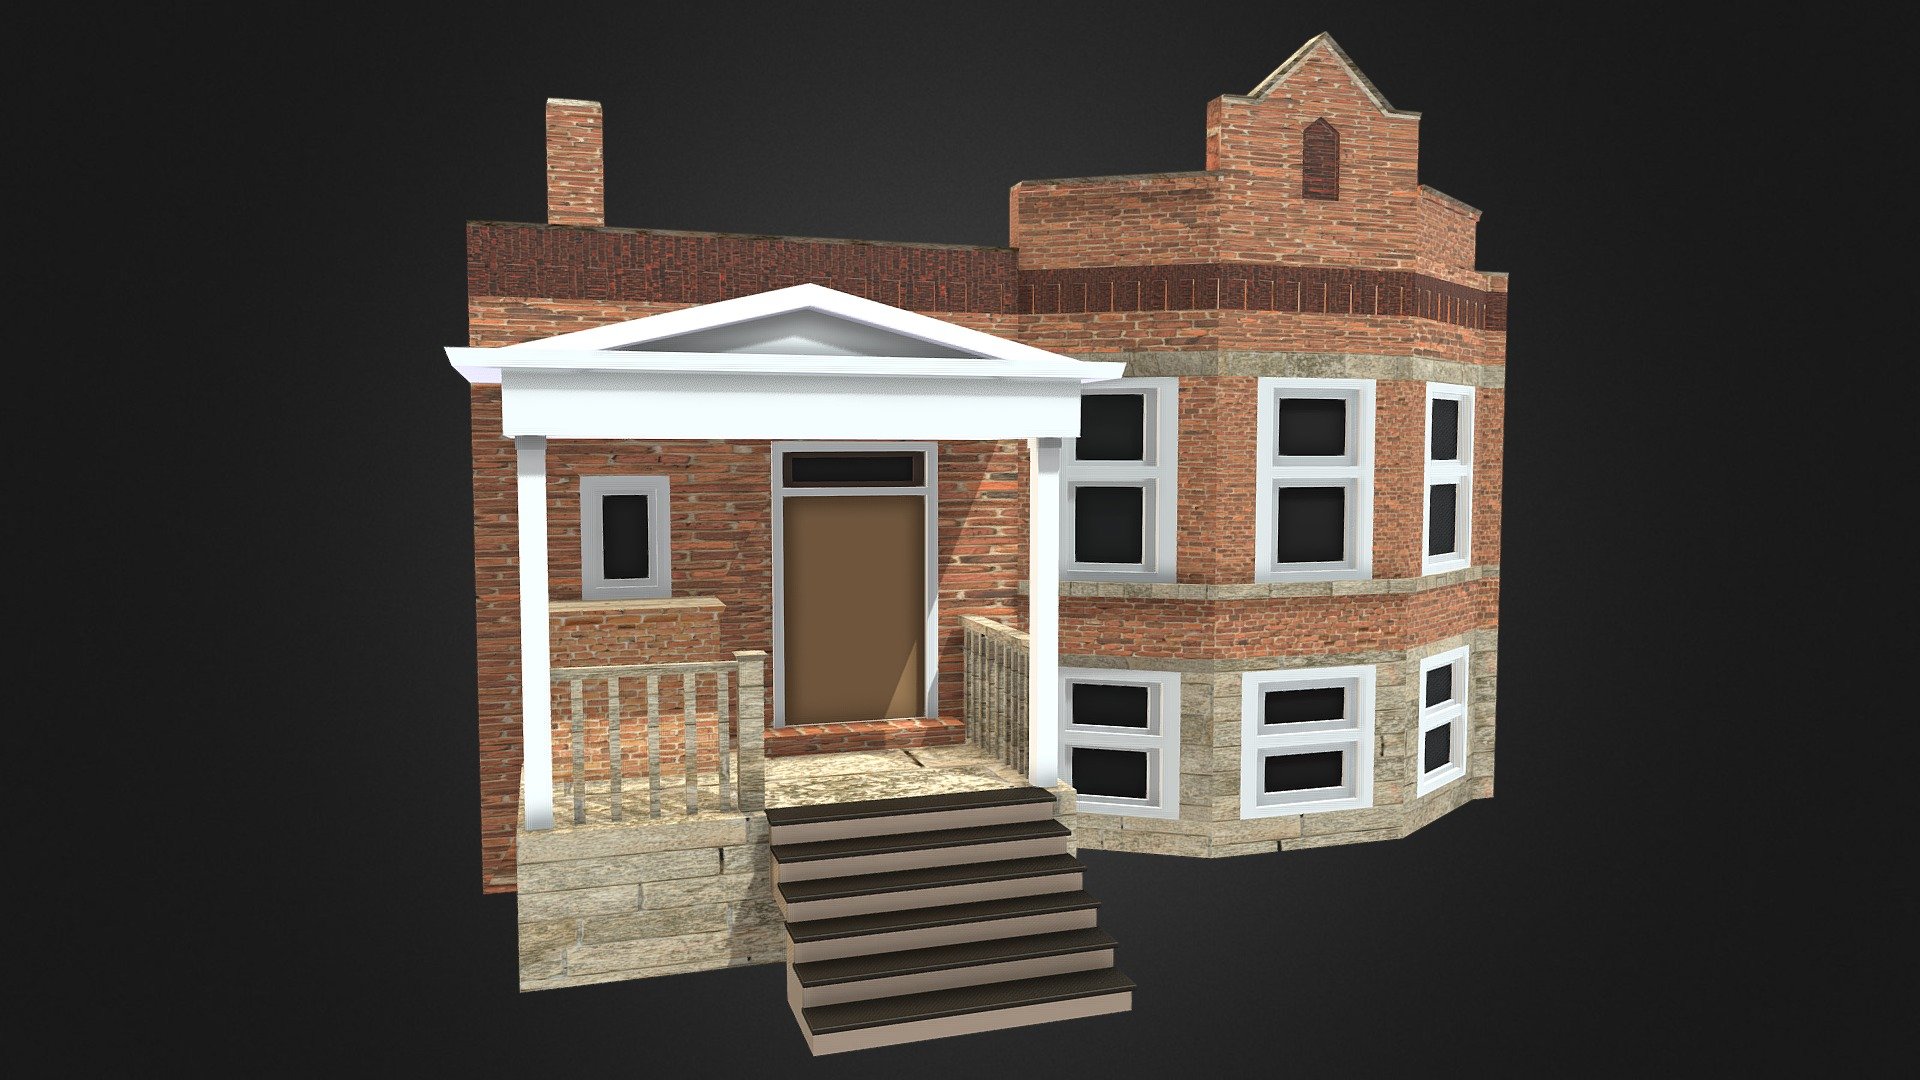 Based on the house of the Milkovich Family from hit tv show “Shameless”.

Links to social media, portfolio, and support: linktr.ee/GhostDeveloper

Get exclusive models and support me: patreon.com/GhostDeveloper - Chicago House - Buy Royalty Free 3D model by GhostDev (@GhostDevReal) 3d model